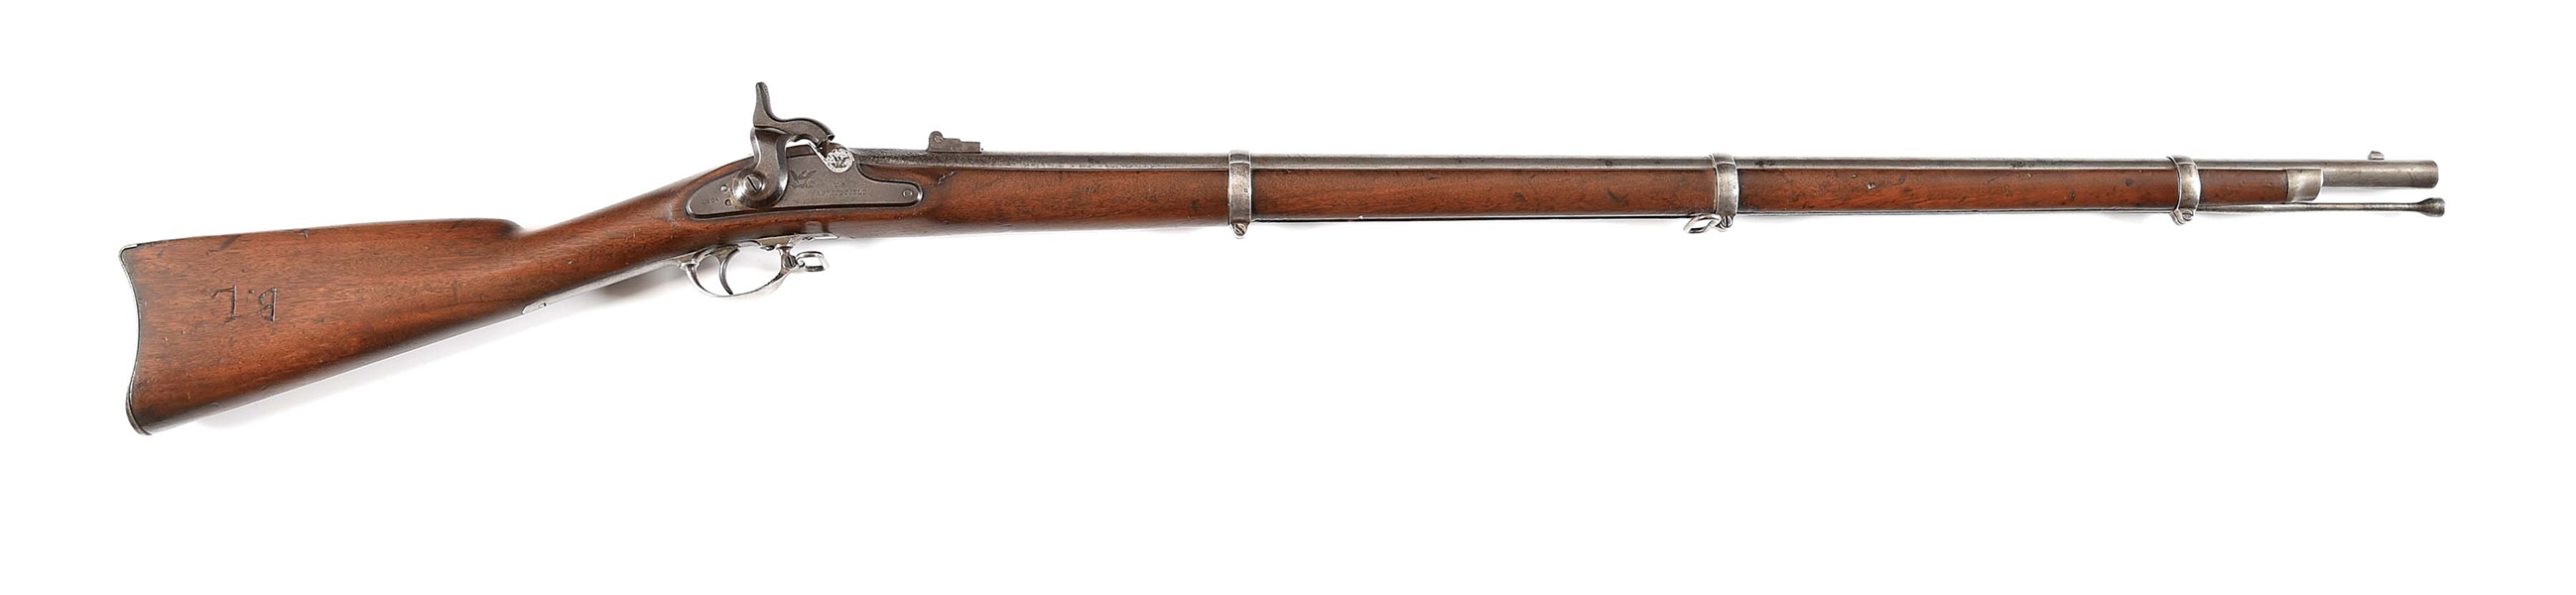 (A) US M1863 PERCUSSION RIFLED MUSKET BY SPRINGFIELD.